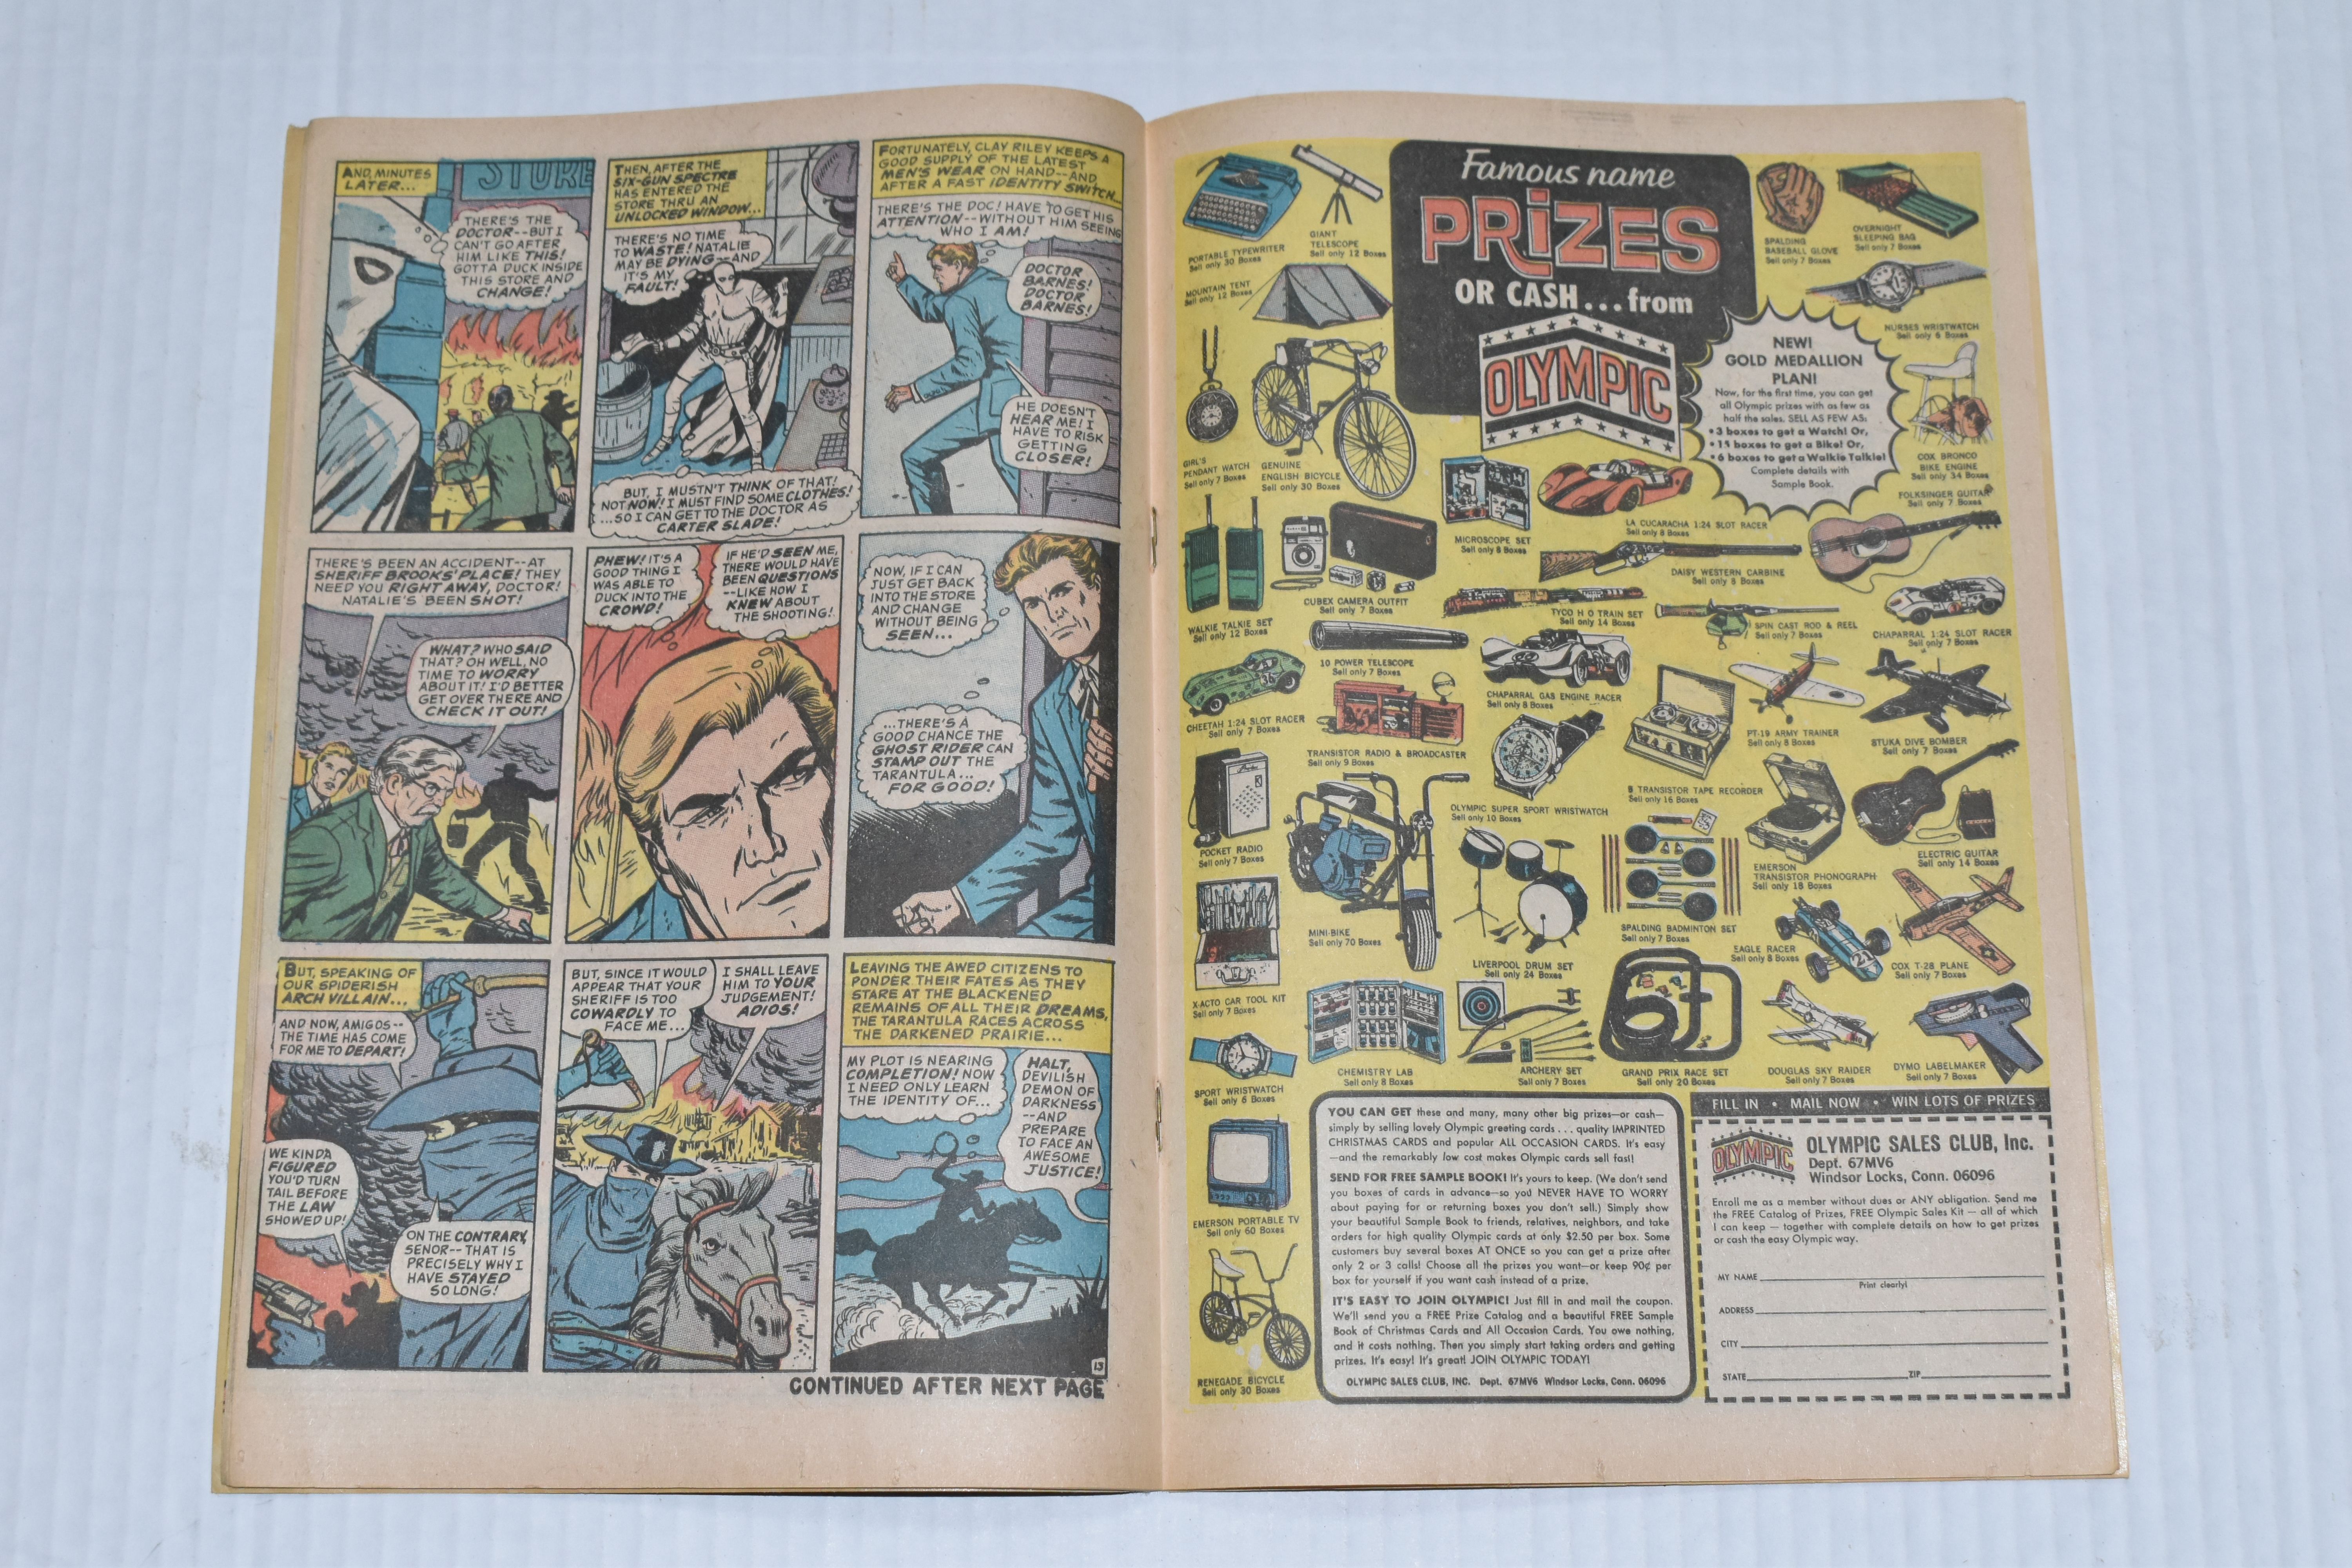 COMPLETE ORIGINAL GHOST RIDER VOLUME 1 MARVEL COMICS, features the first appearance of the - Image 13 of 25